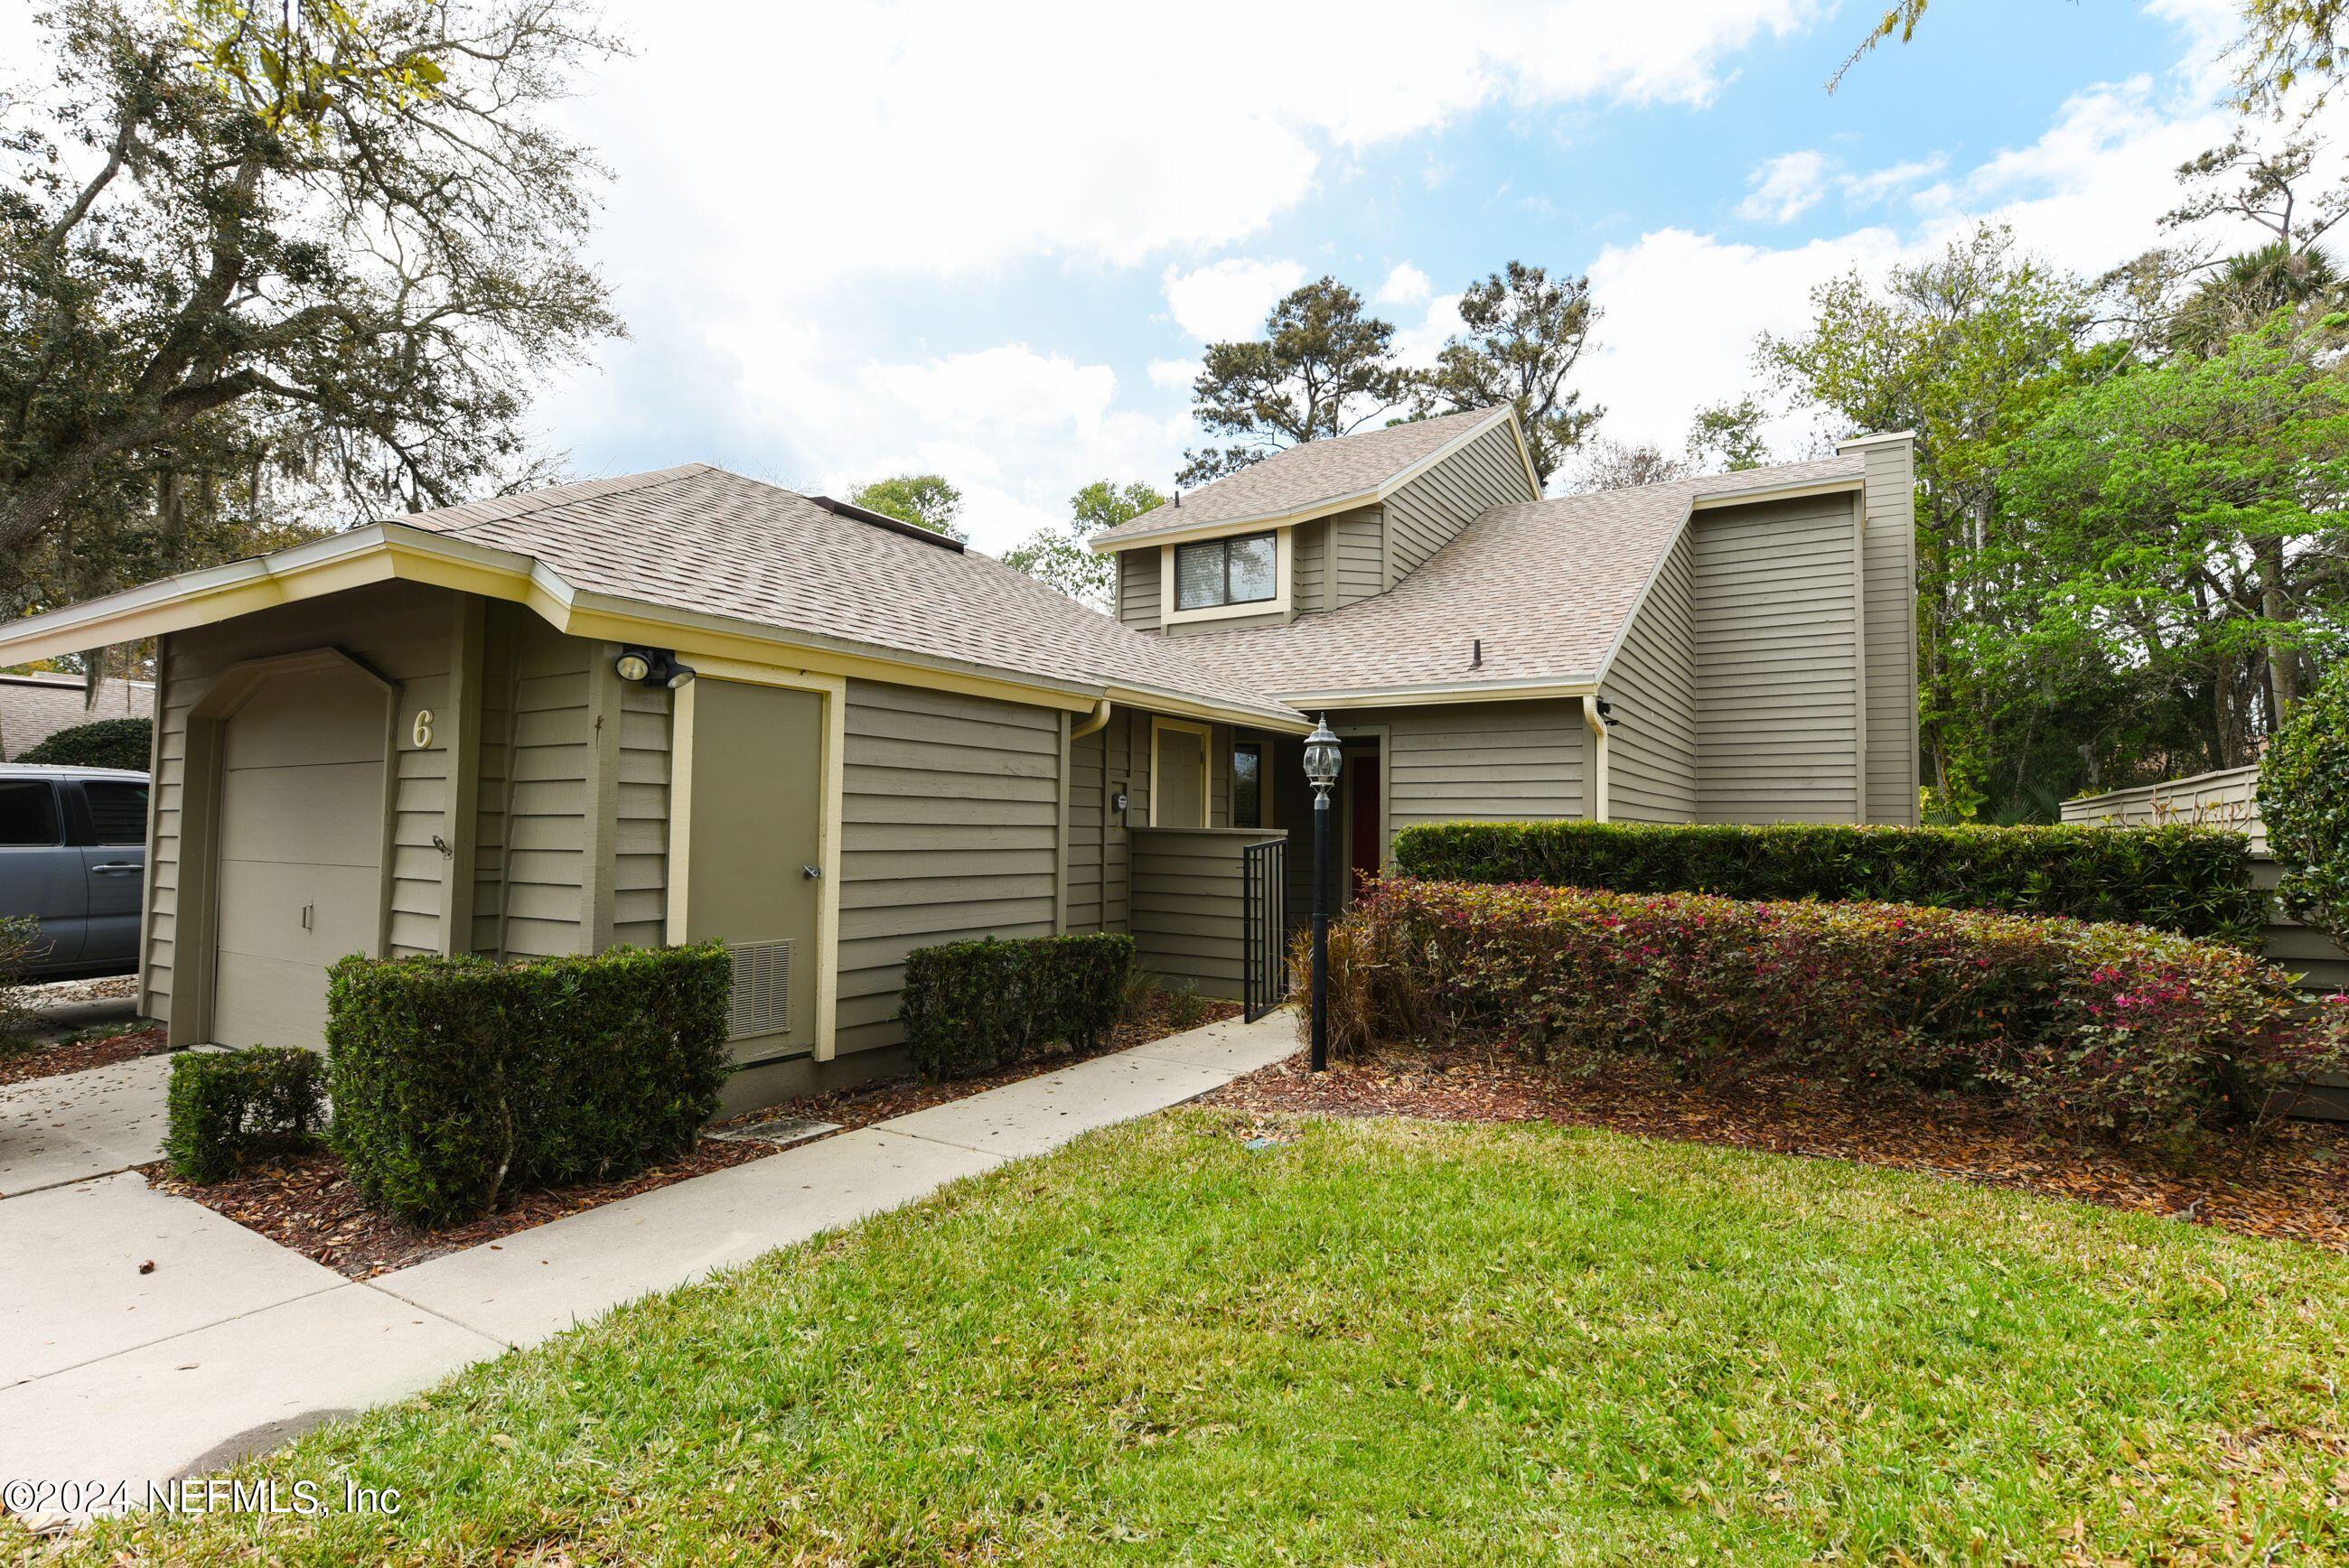 Ponte Vedra Beach, FL home for sale located at 6 LOGGERHEAD Lane, Ponte Vedra Beach, FL 32082